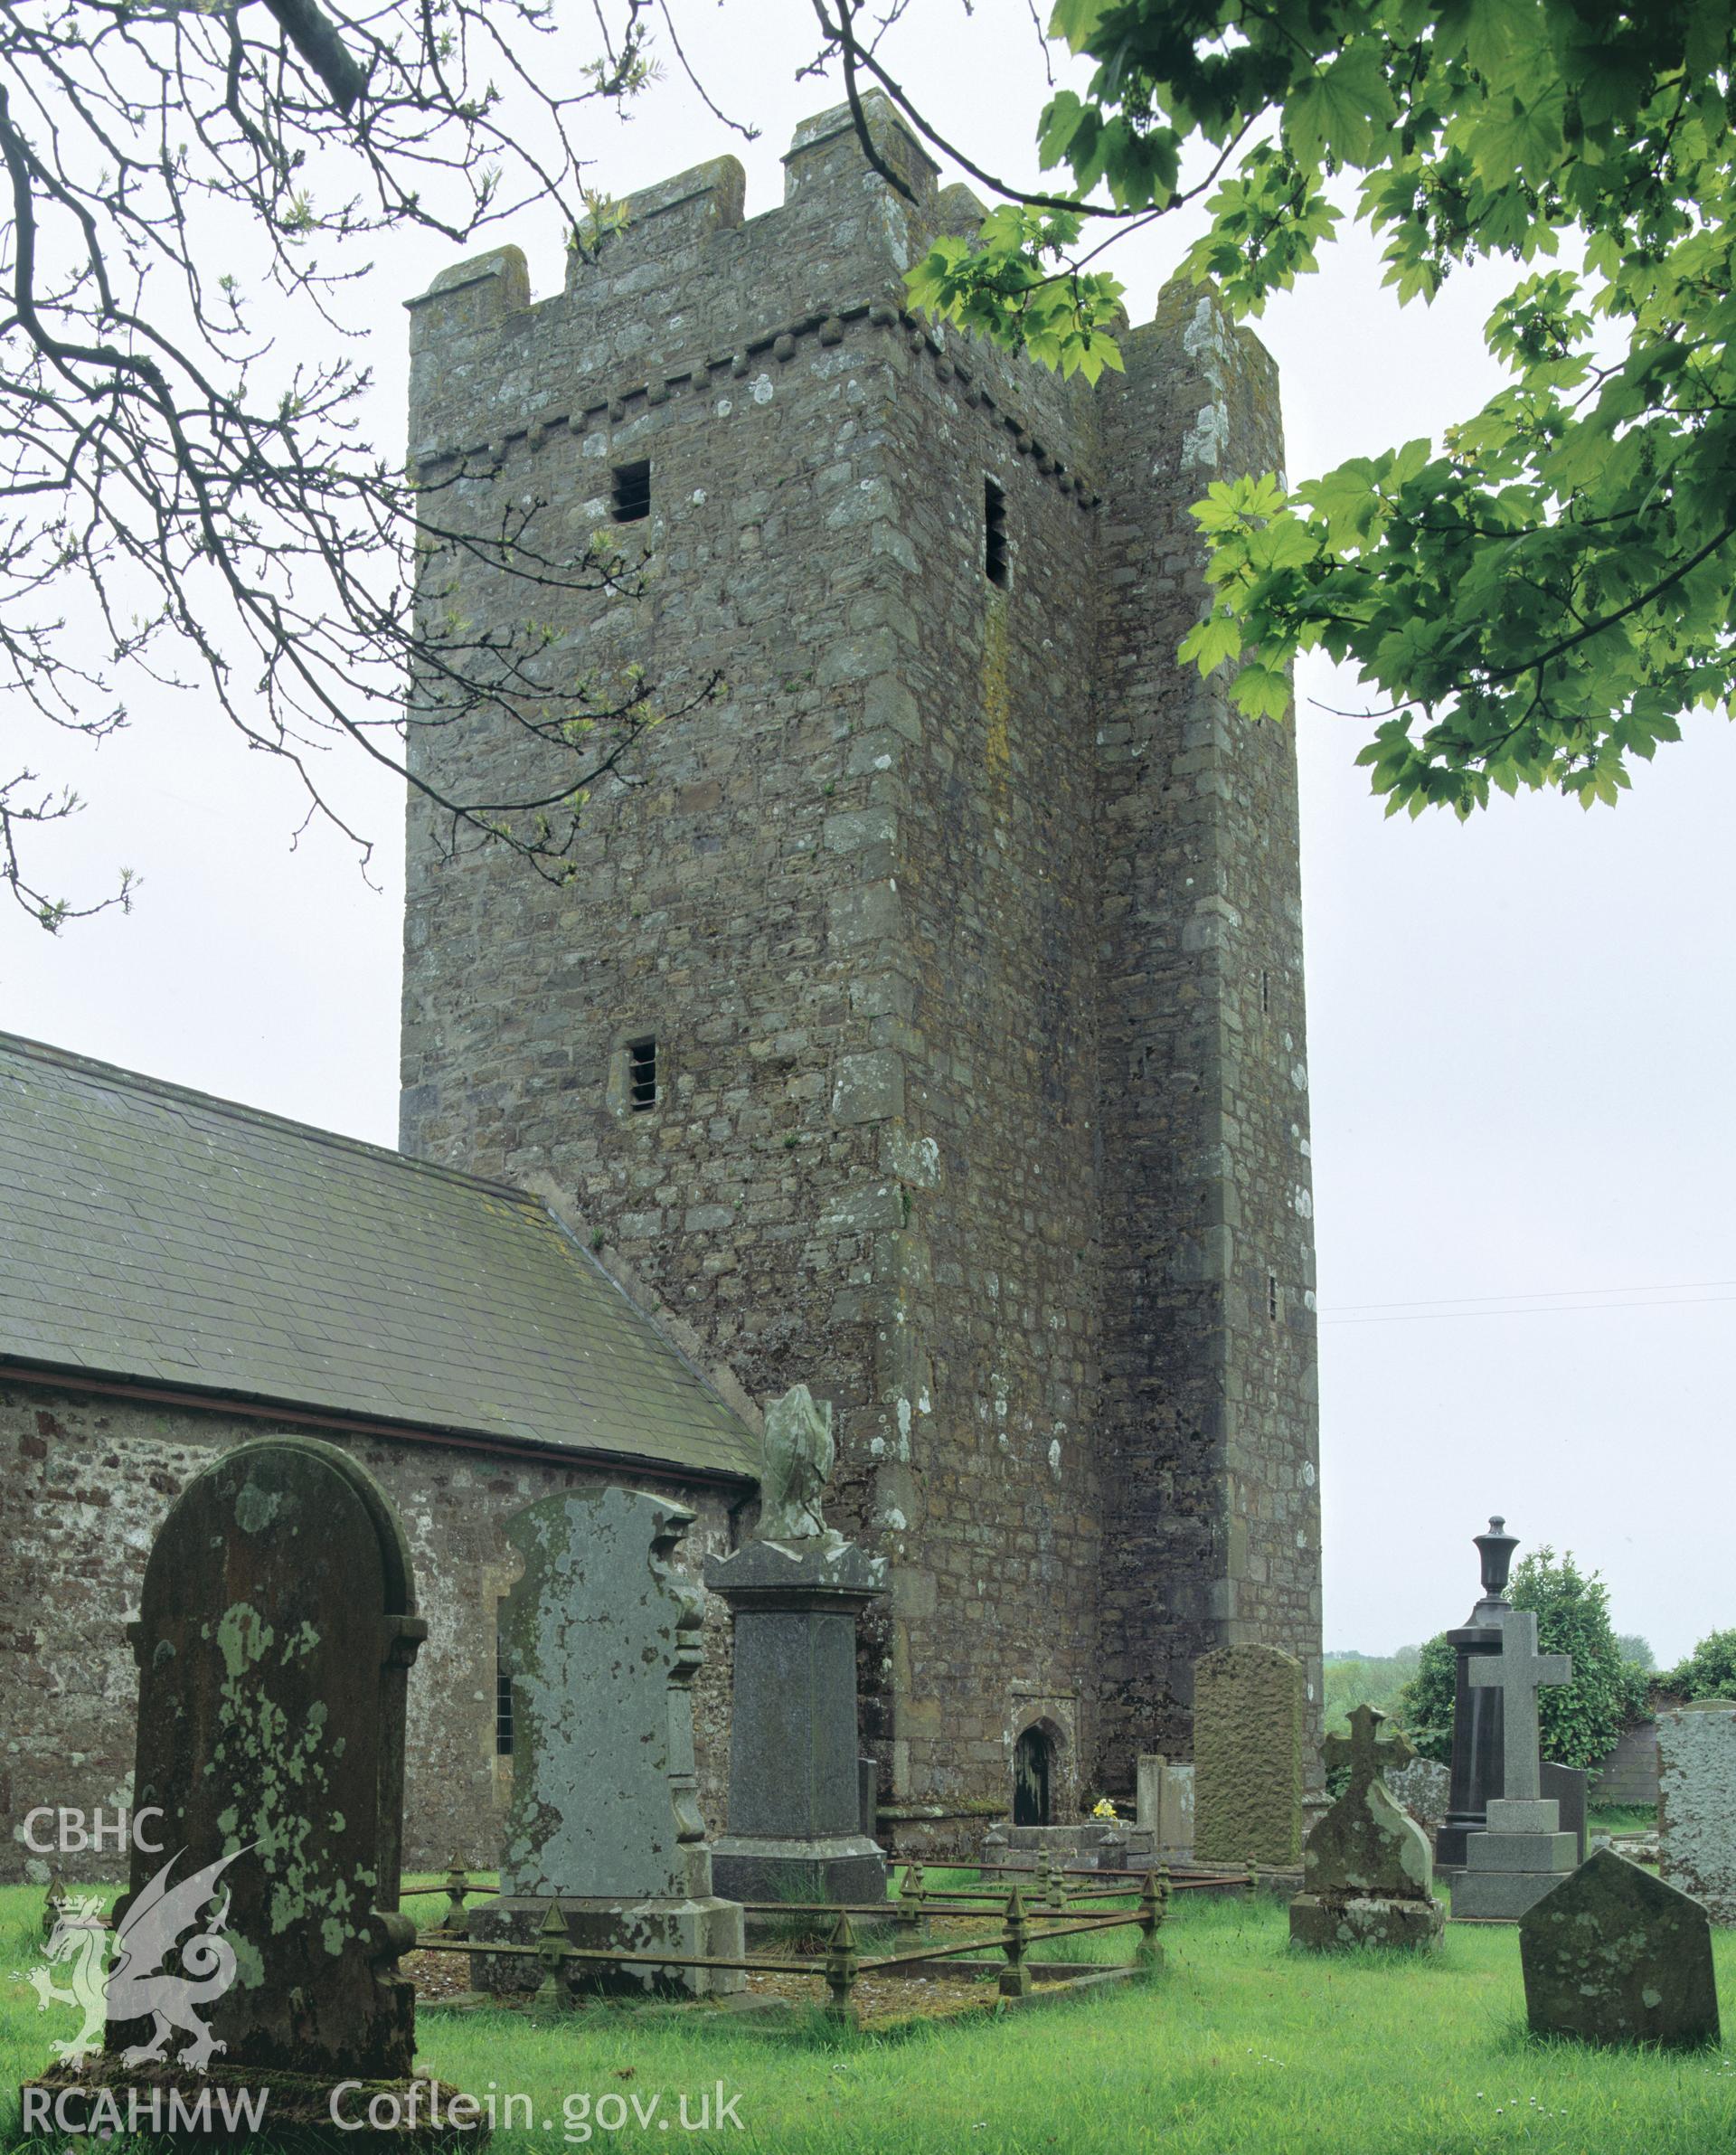 Colour transparency showing an exterior view of Cyffig Church, produced by Iain Wright, June 2004.